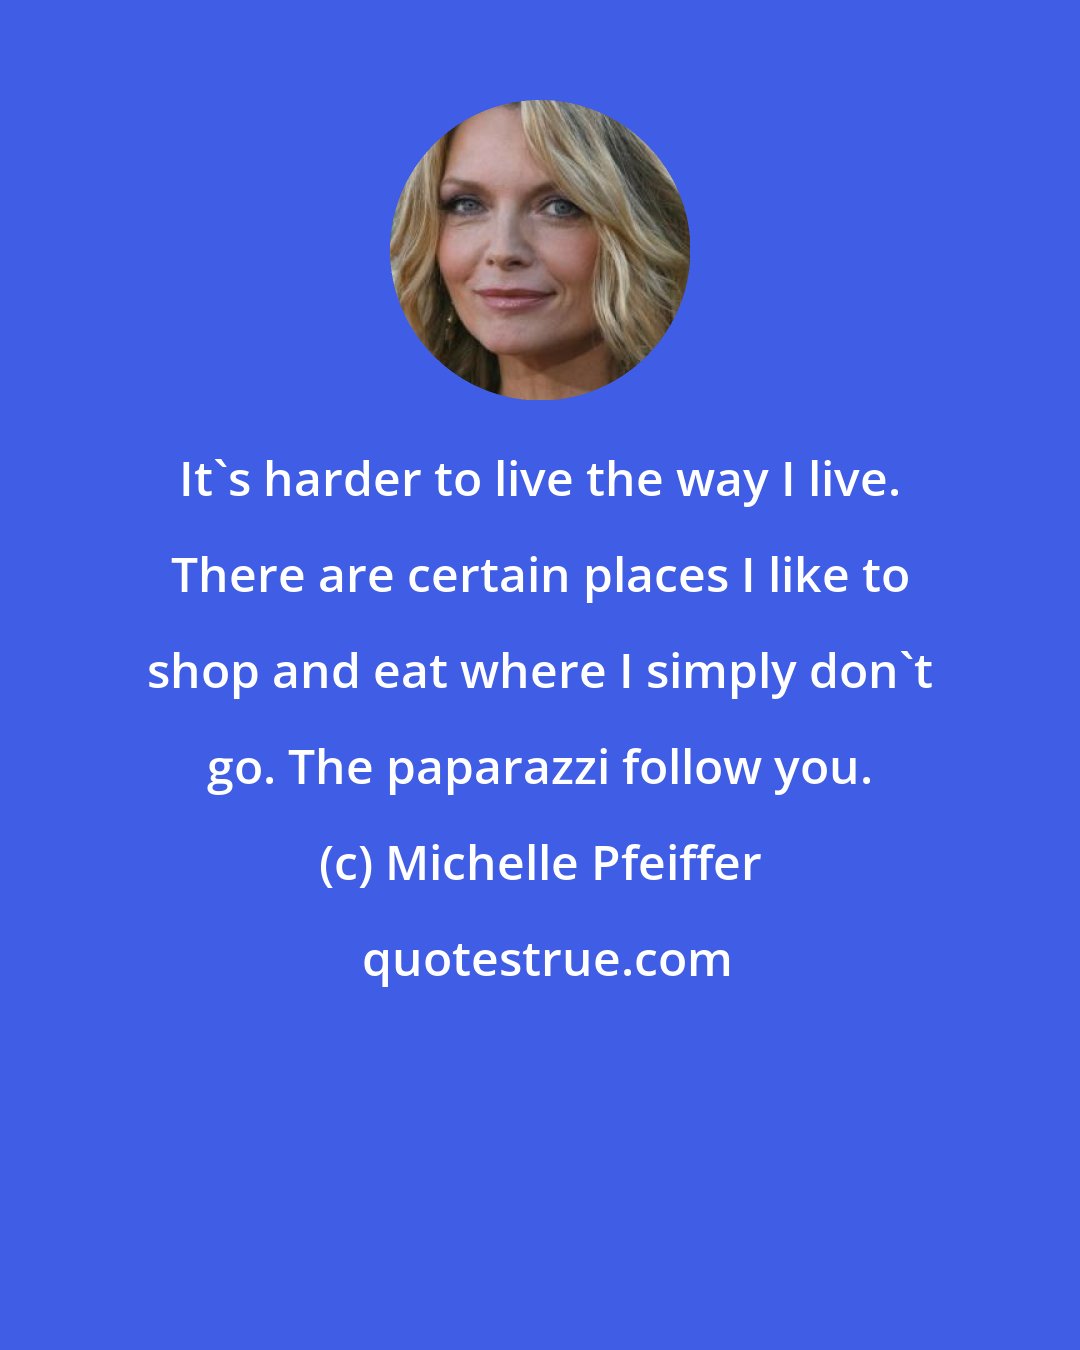 Michelle Pfeiffer: It's harder to live the way I live. There are certain places I like to shop and eat where I simply don't go. The paparazzi follow you.